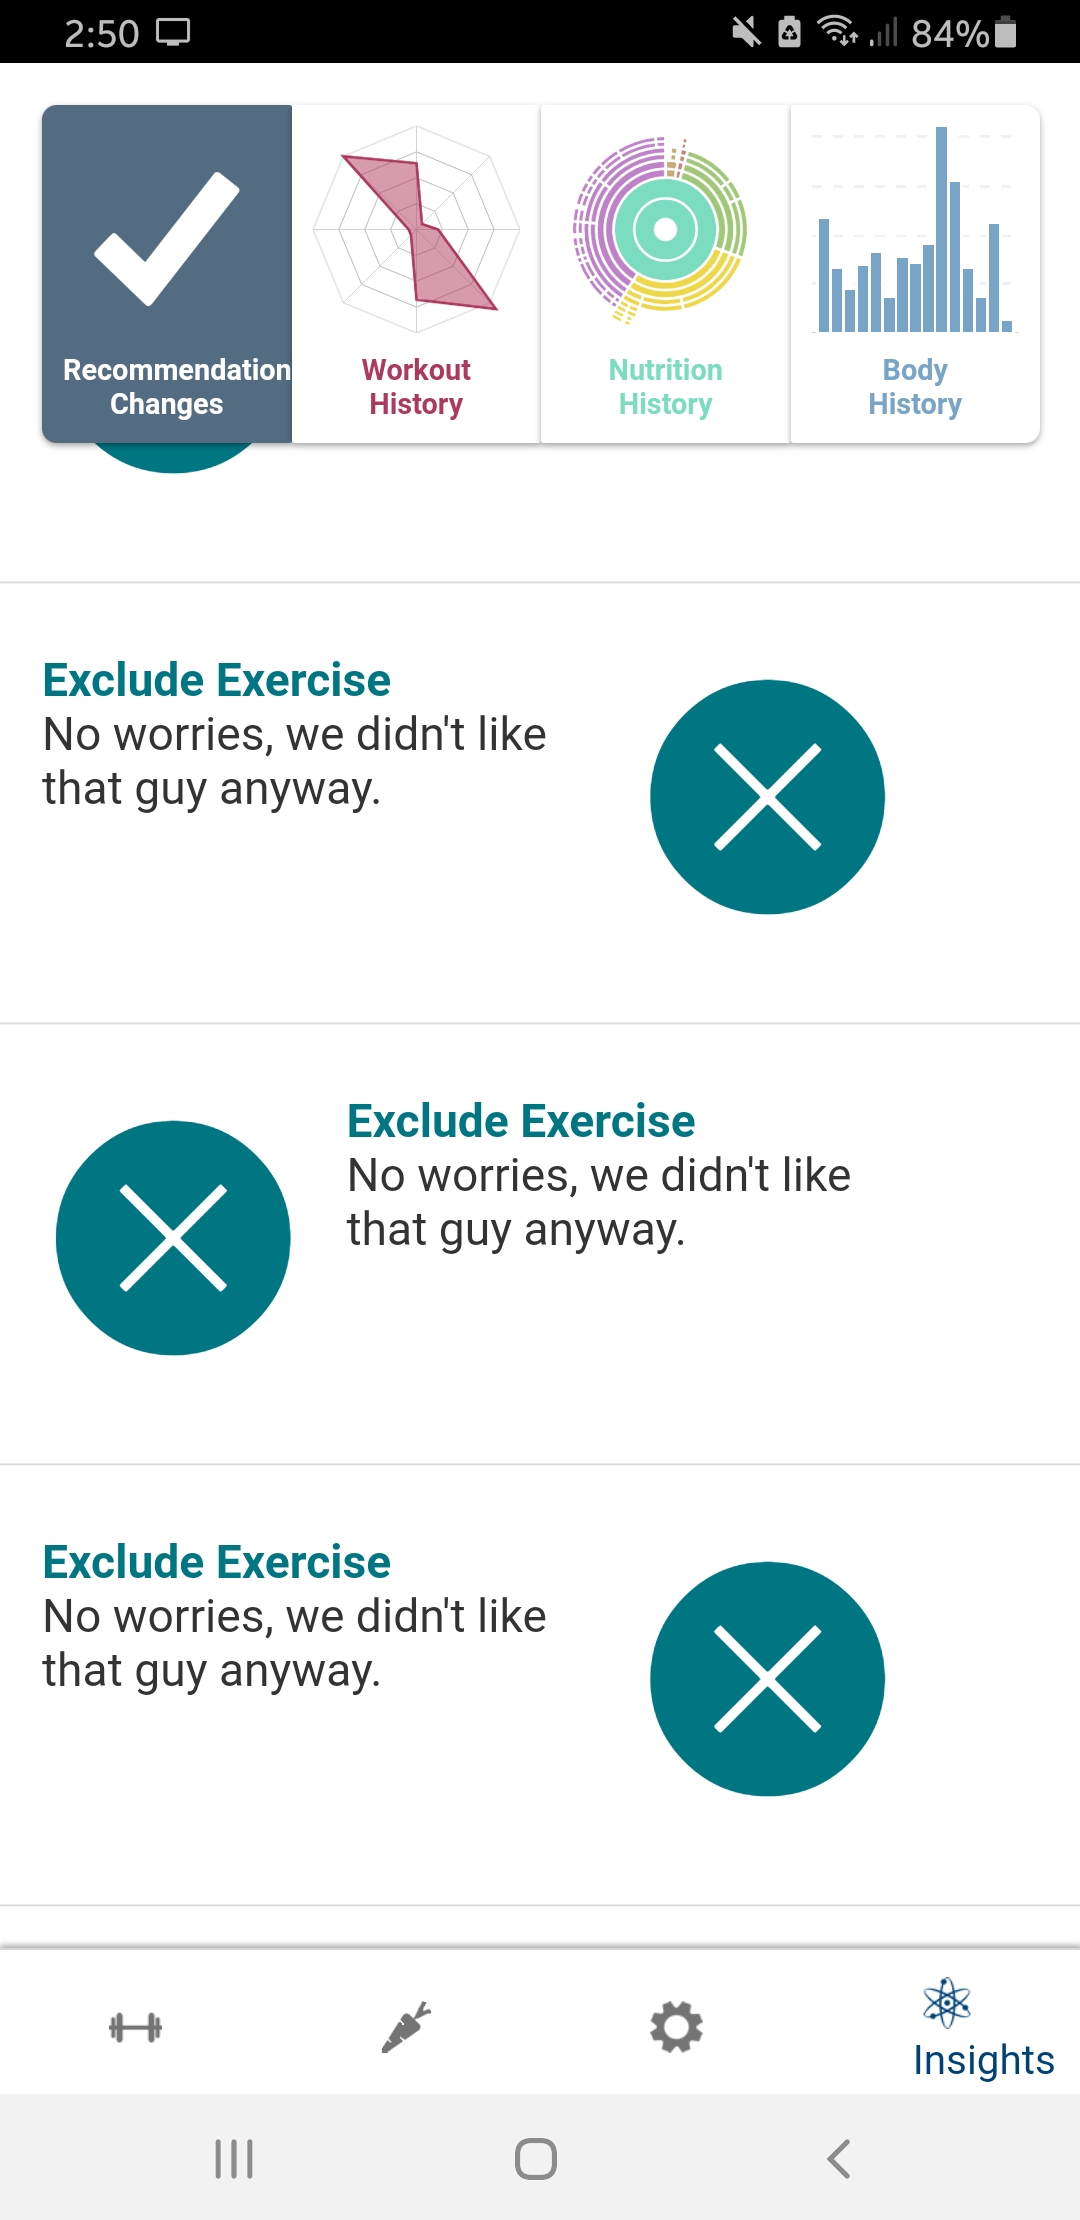 A screenshot from the BodBot app with the message "Exclude Exercise: No worries, we don't like that guy either".